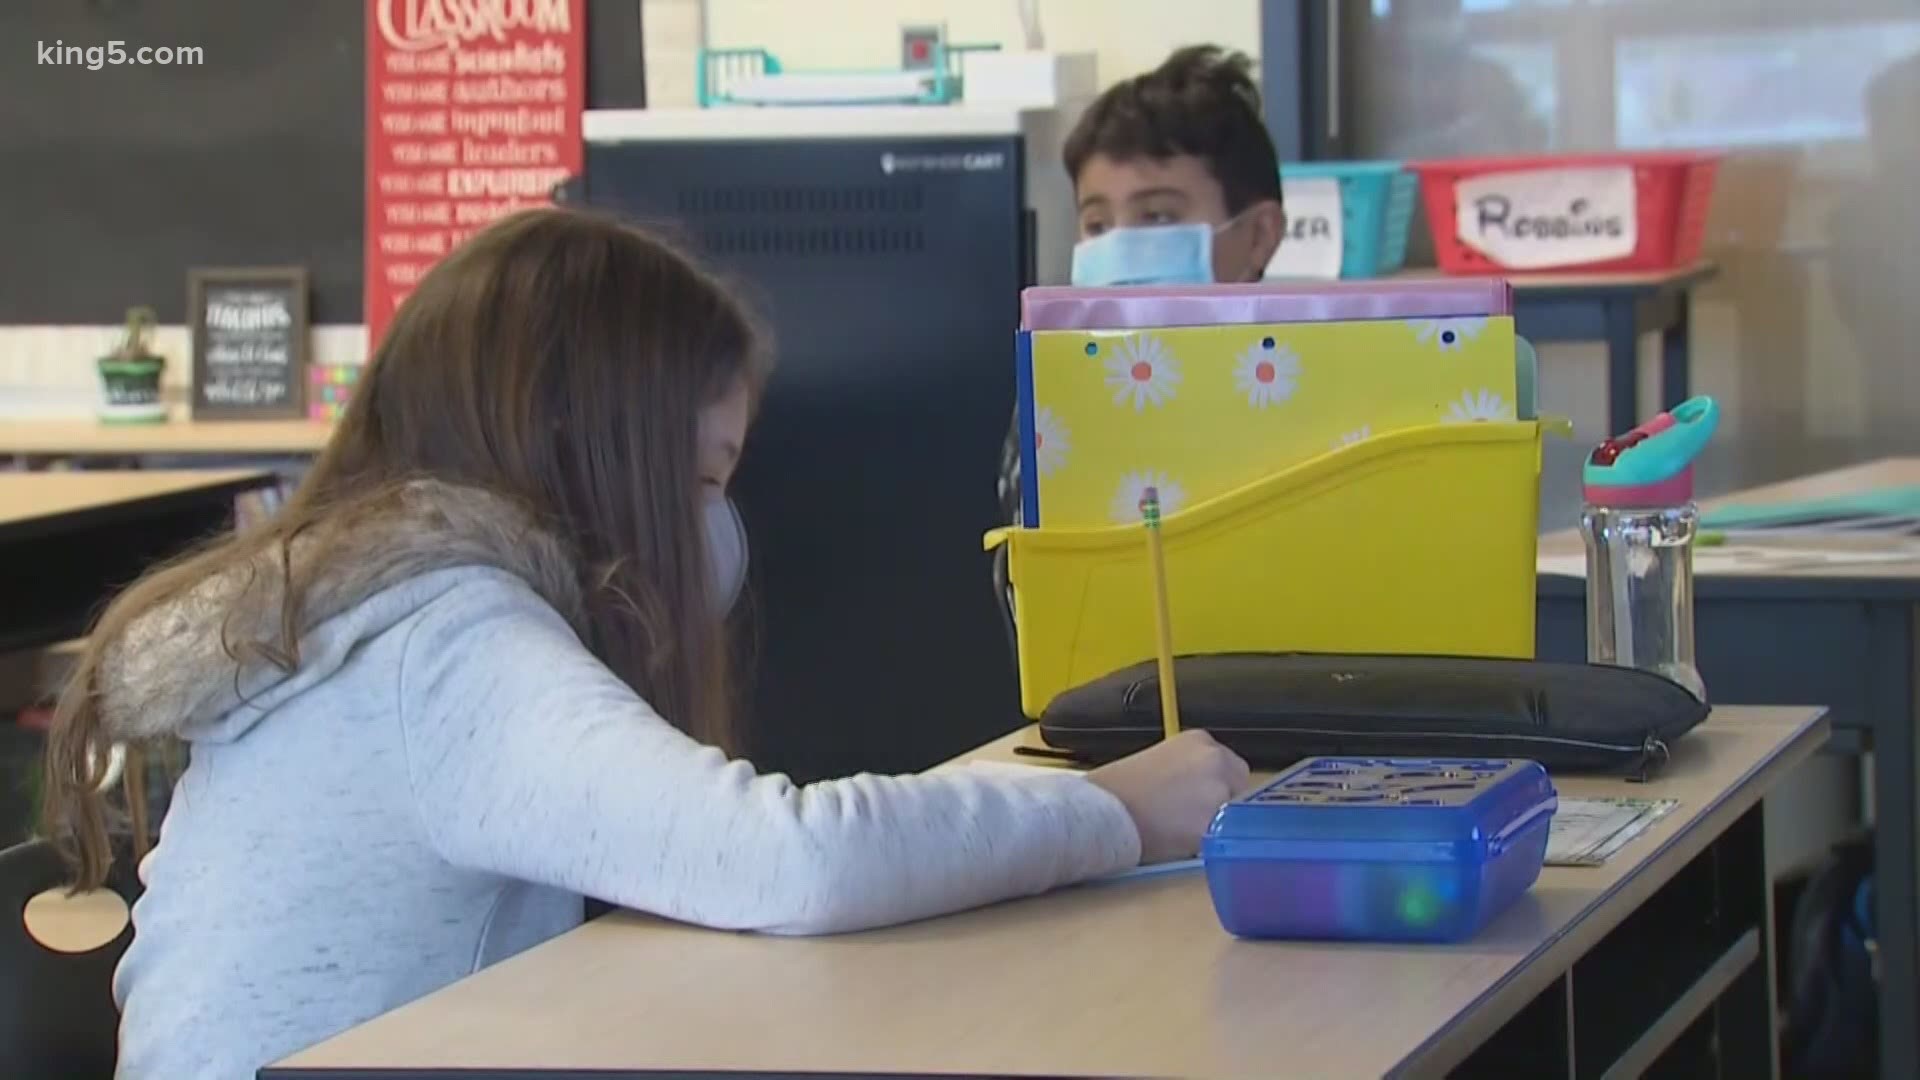 The return of most Seattle public school students is being delayed past the March 1st to prioritize special education students who require more in-person teaching.